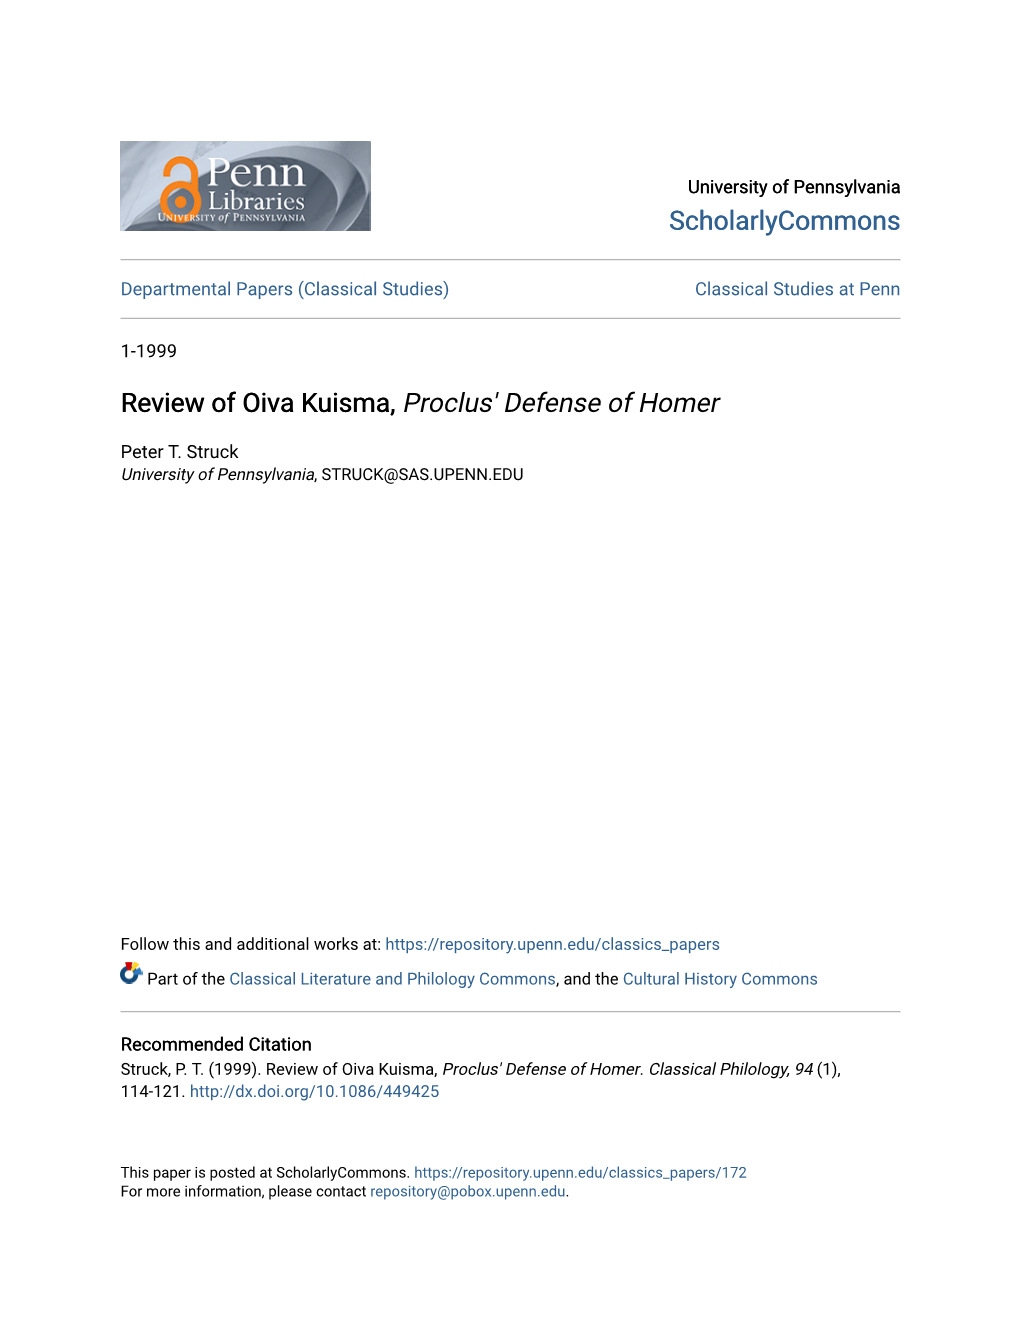 Review of Oiva Kuisma, Proclus' Defense of Homer